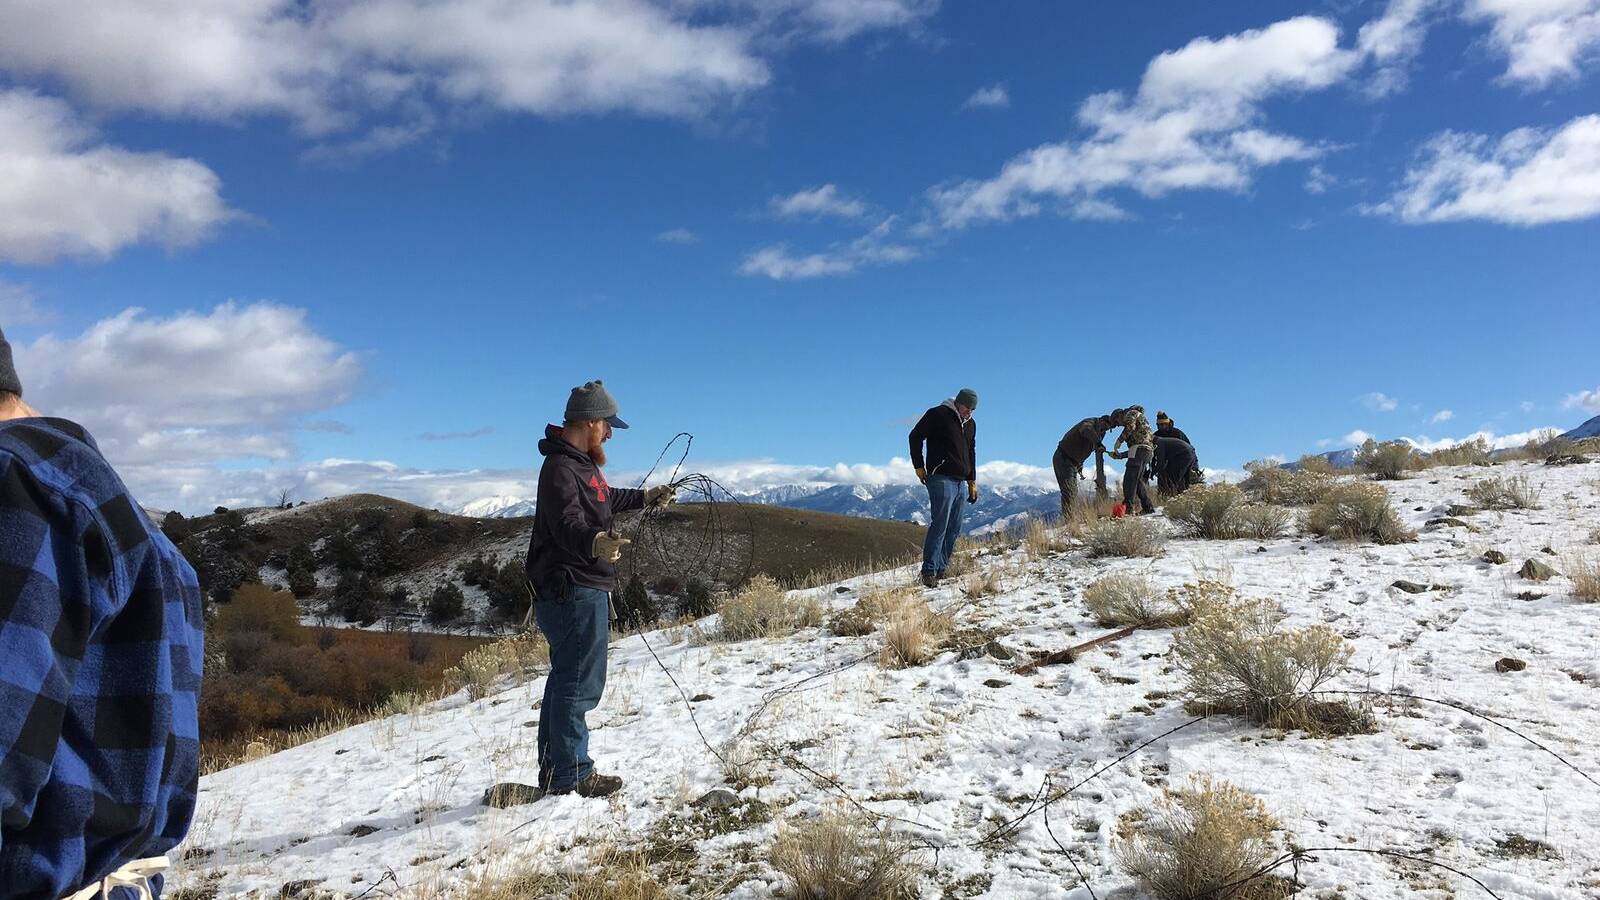 15 veterans from Montana State University worked to protect pronghorn antelope in the Greater Yellowstone Ecosystem by removing more than 2,300 feet of barbed wire fencing that inhibits the pronghorns’ migratory path. 